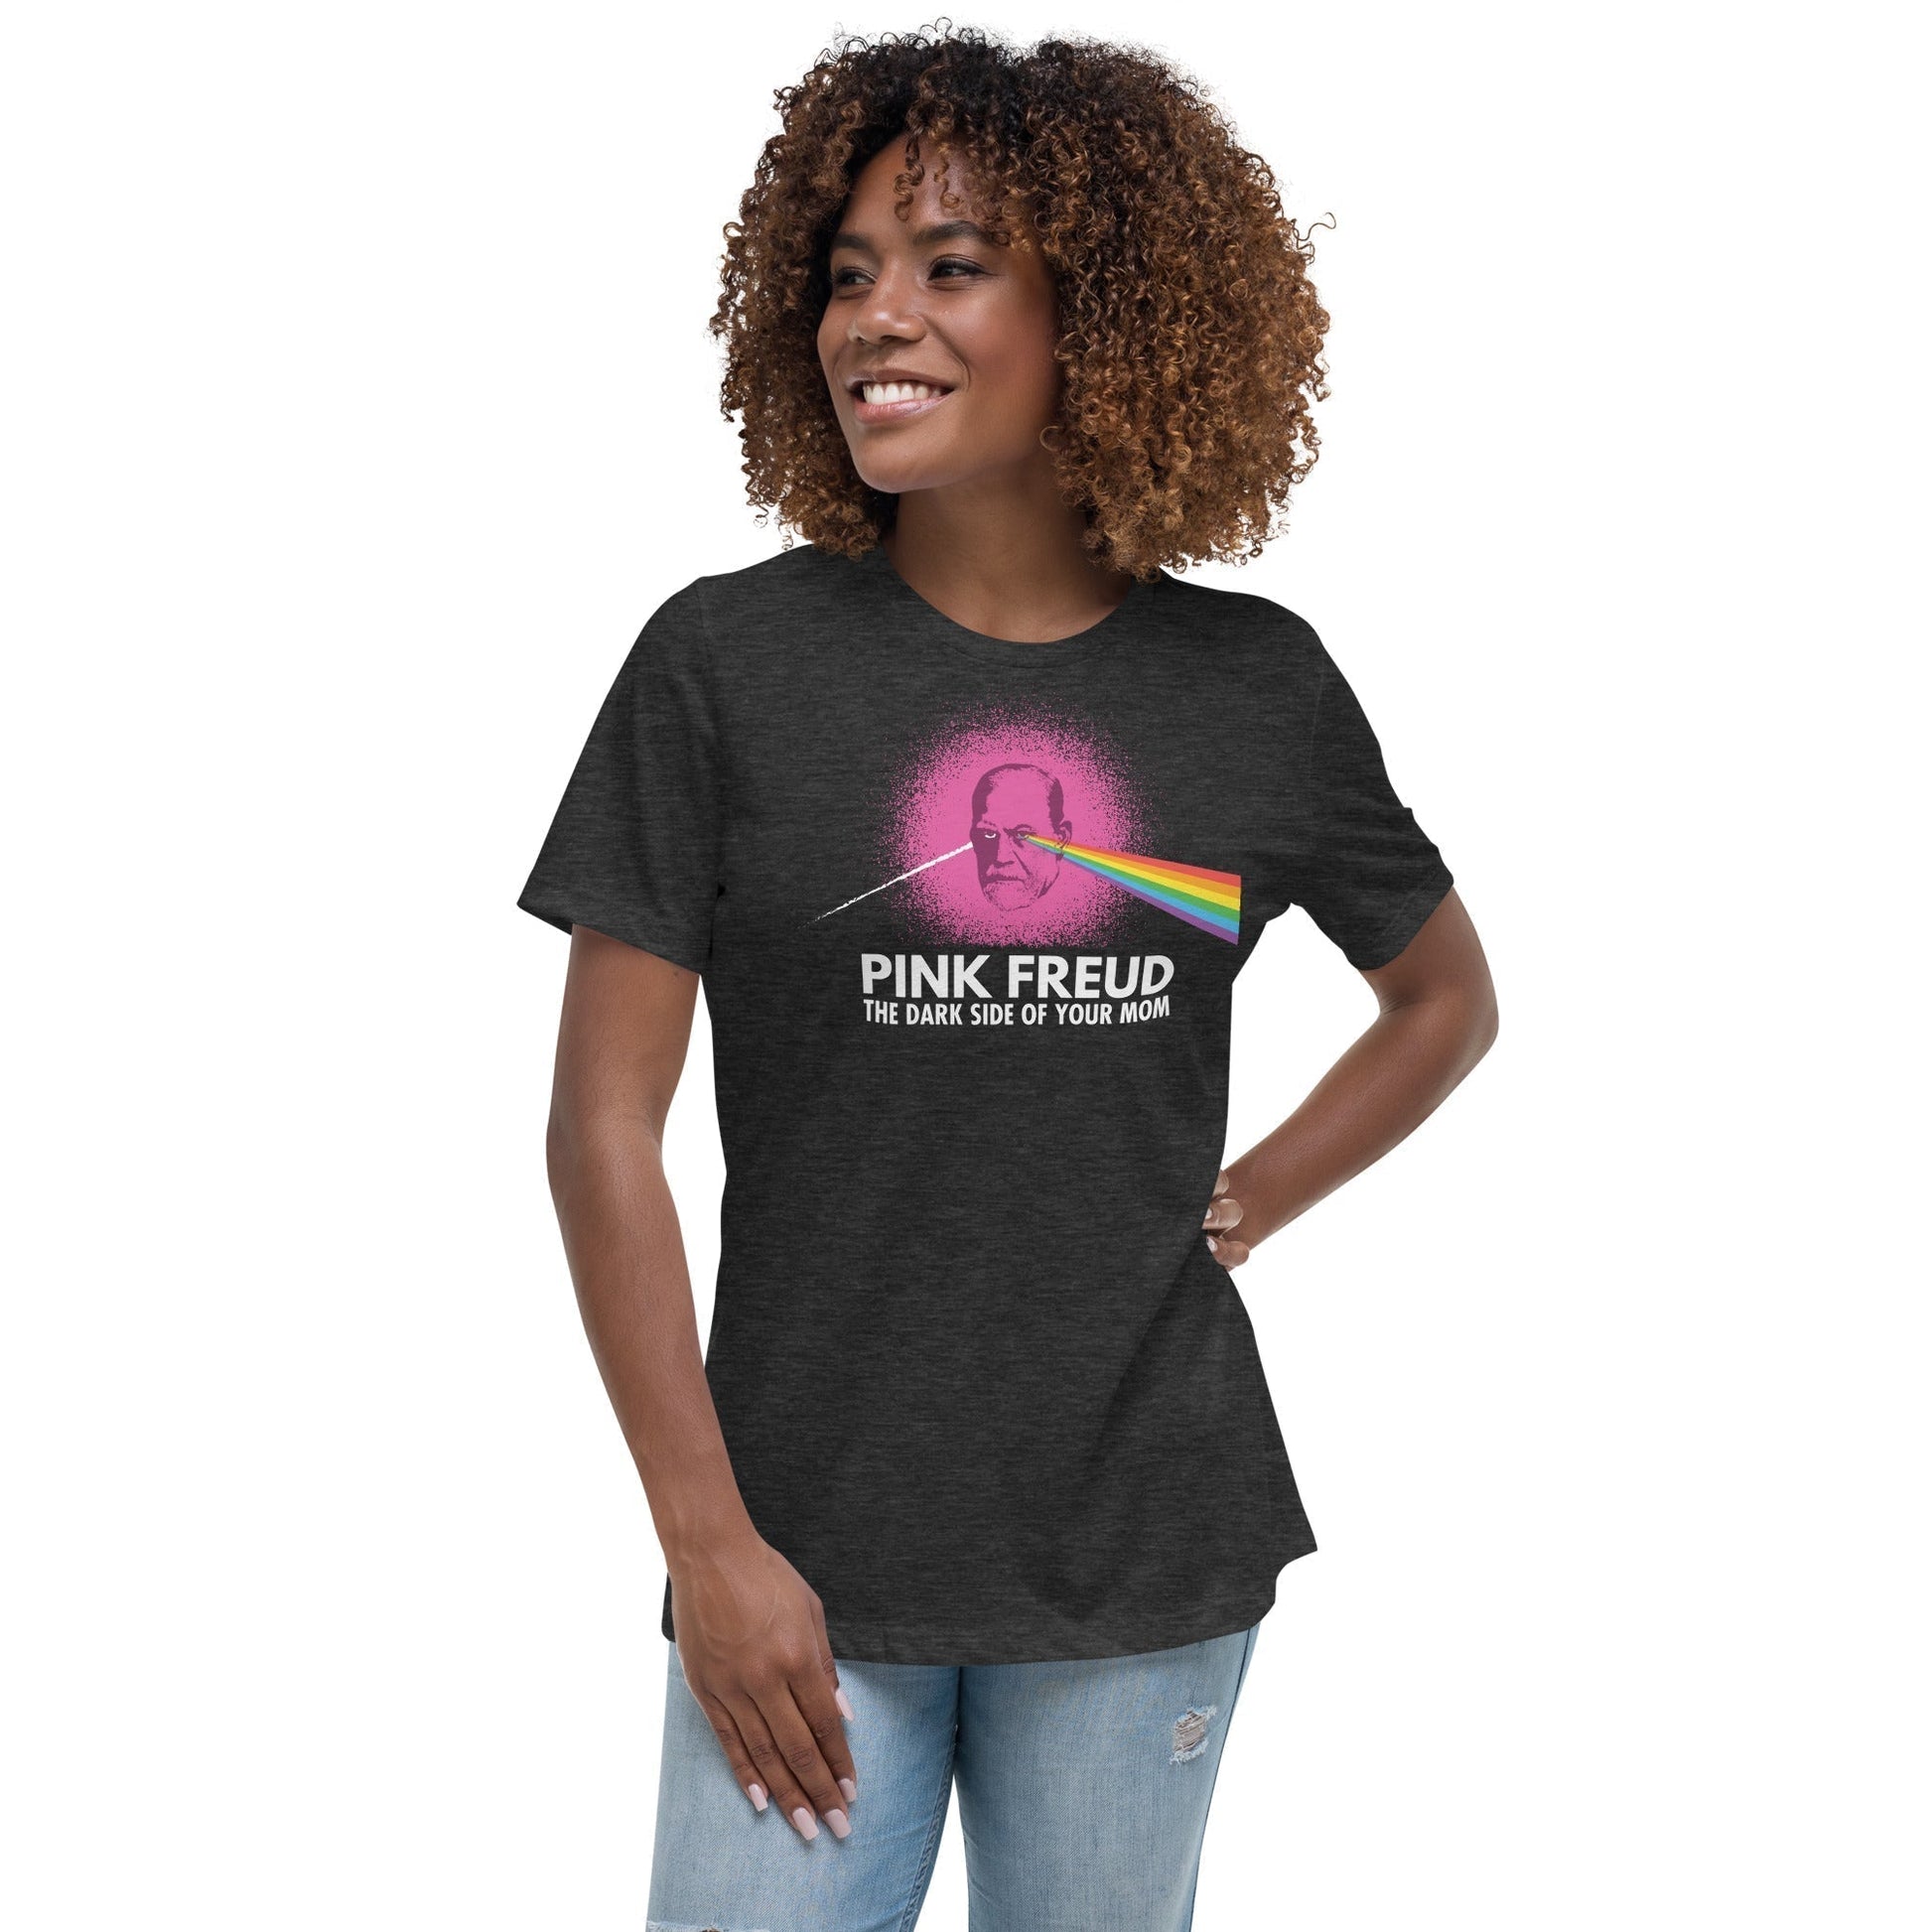 Pink Freud - The Dark Side Of Your Mom - Women's T-Shirt